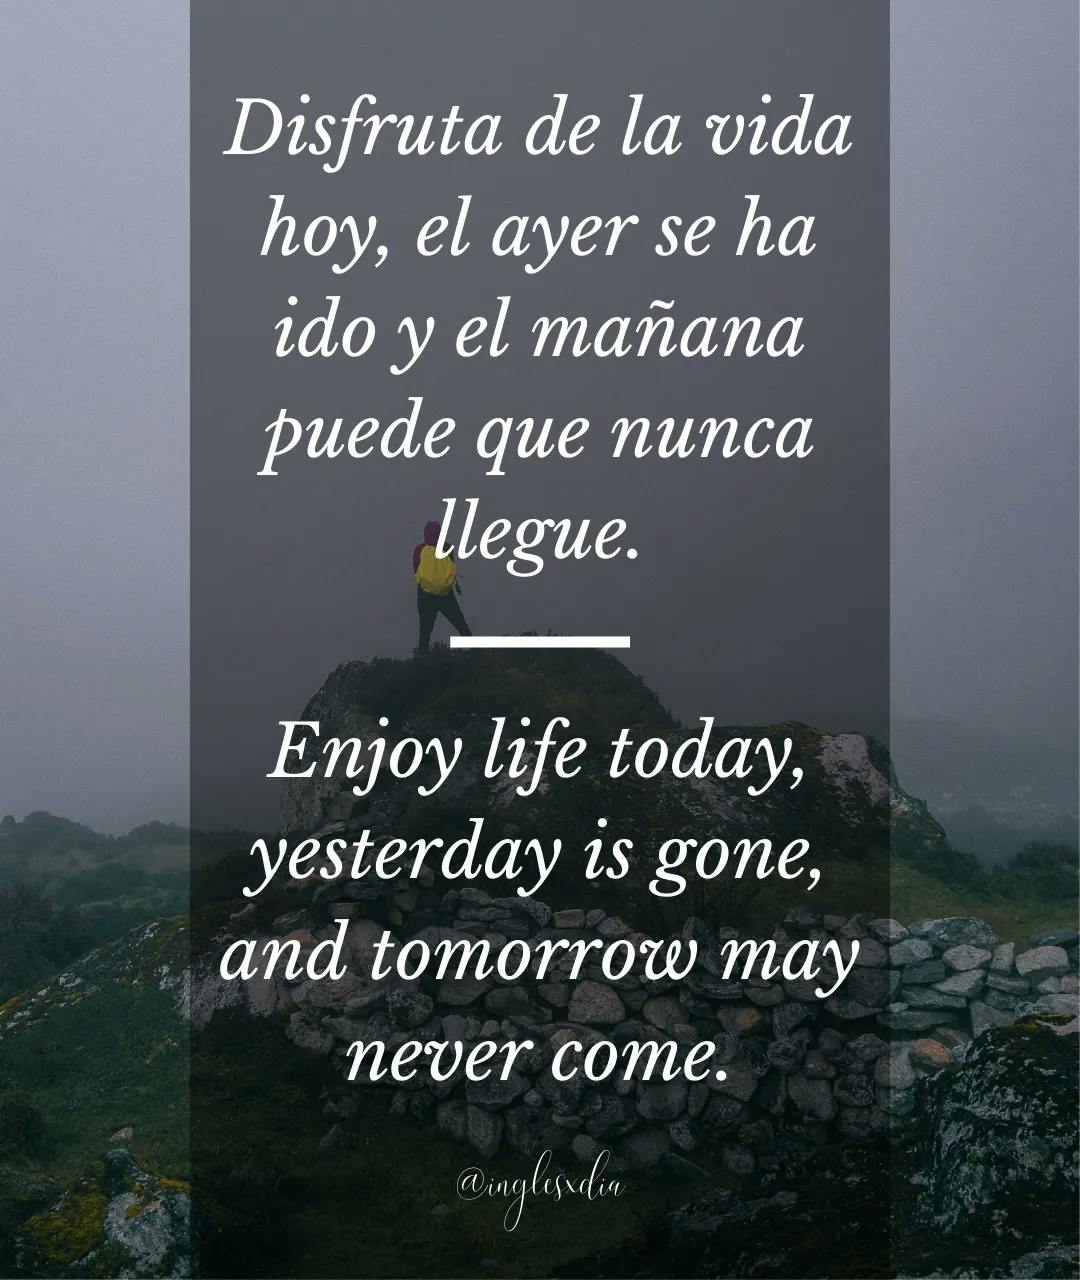 Frases motivadoras en inglés: Enjoy life today, yesterday is gone, and tomorrow may never come.